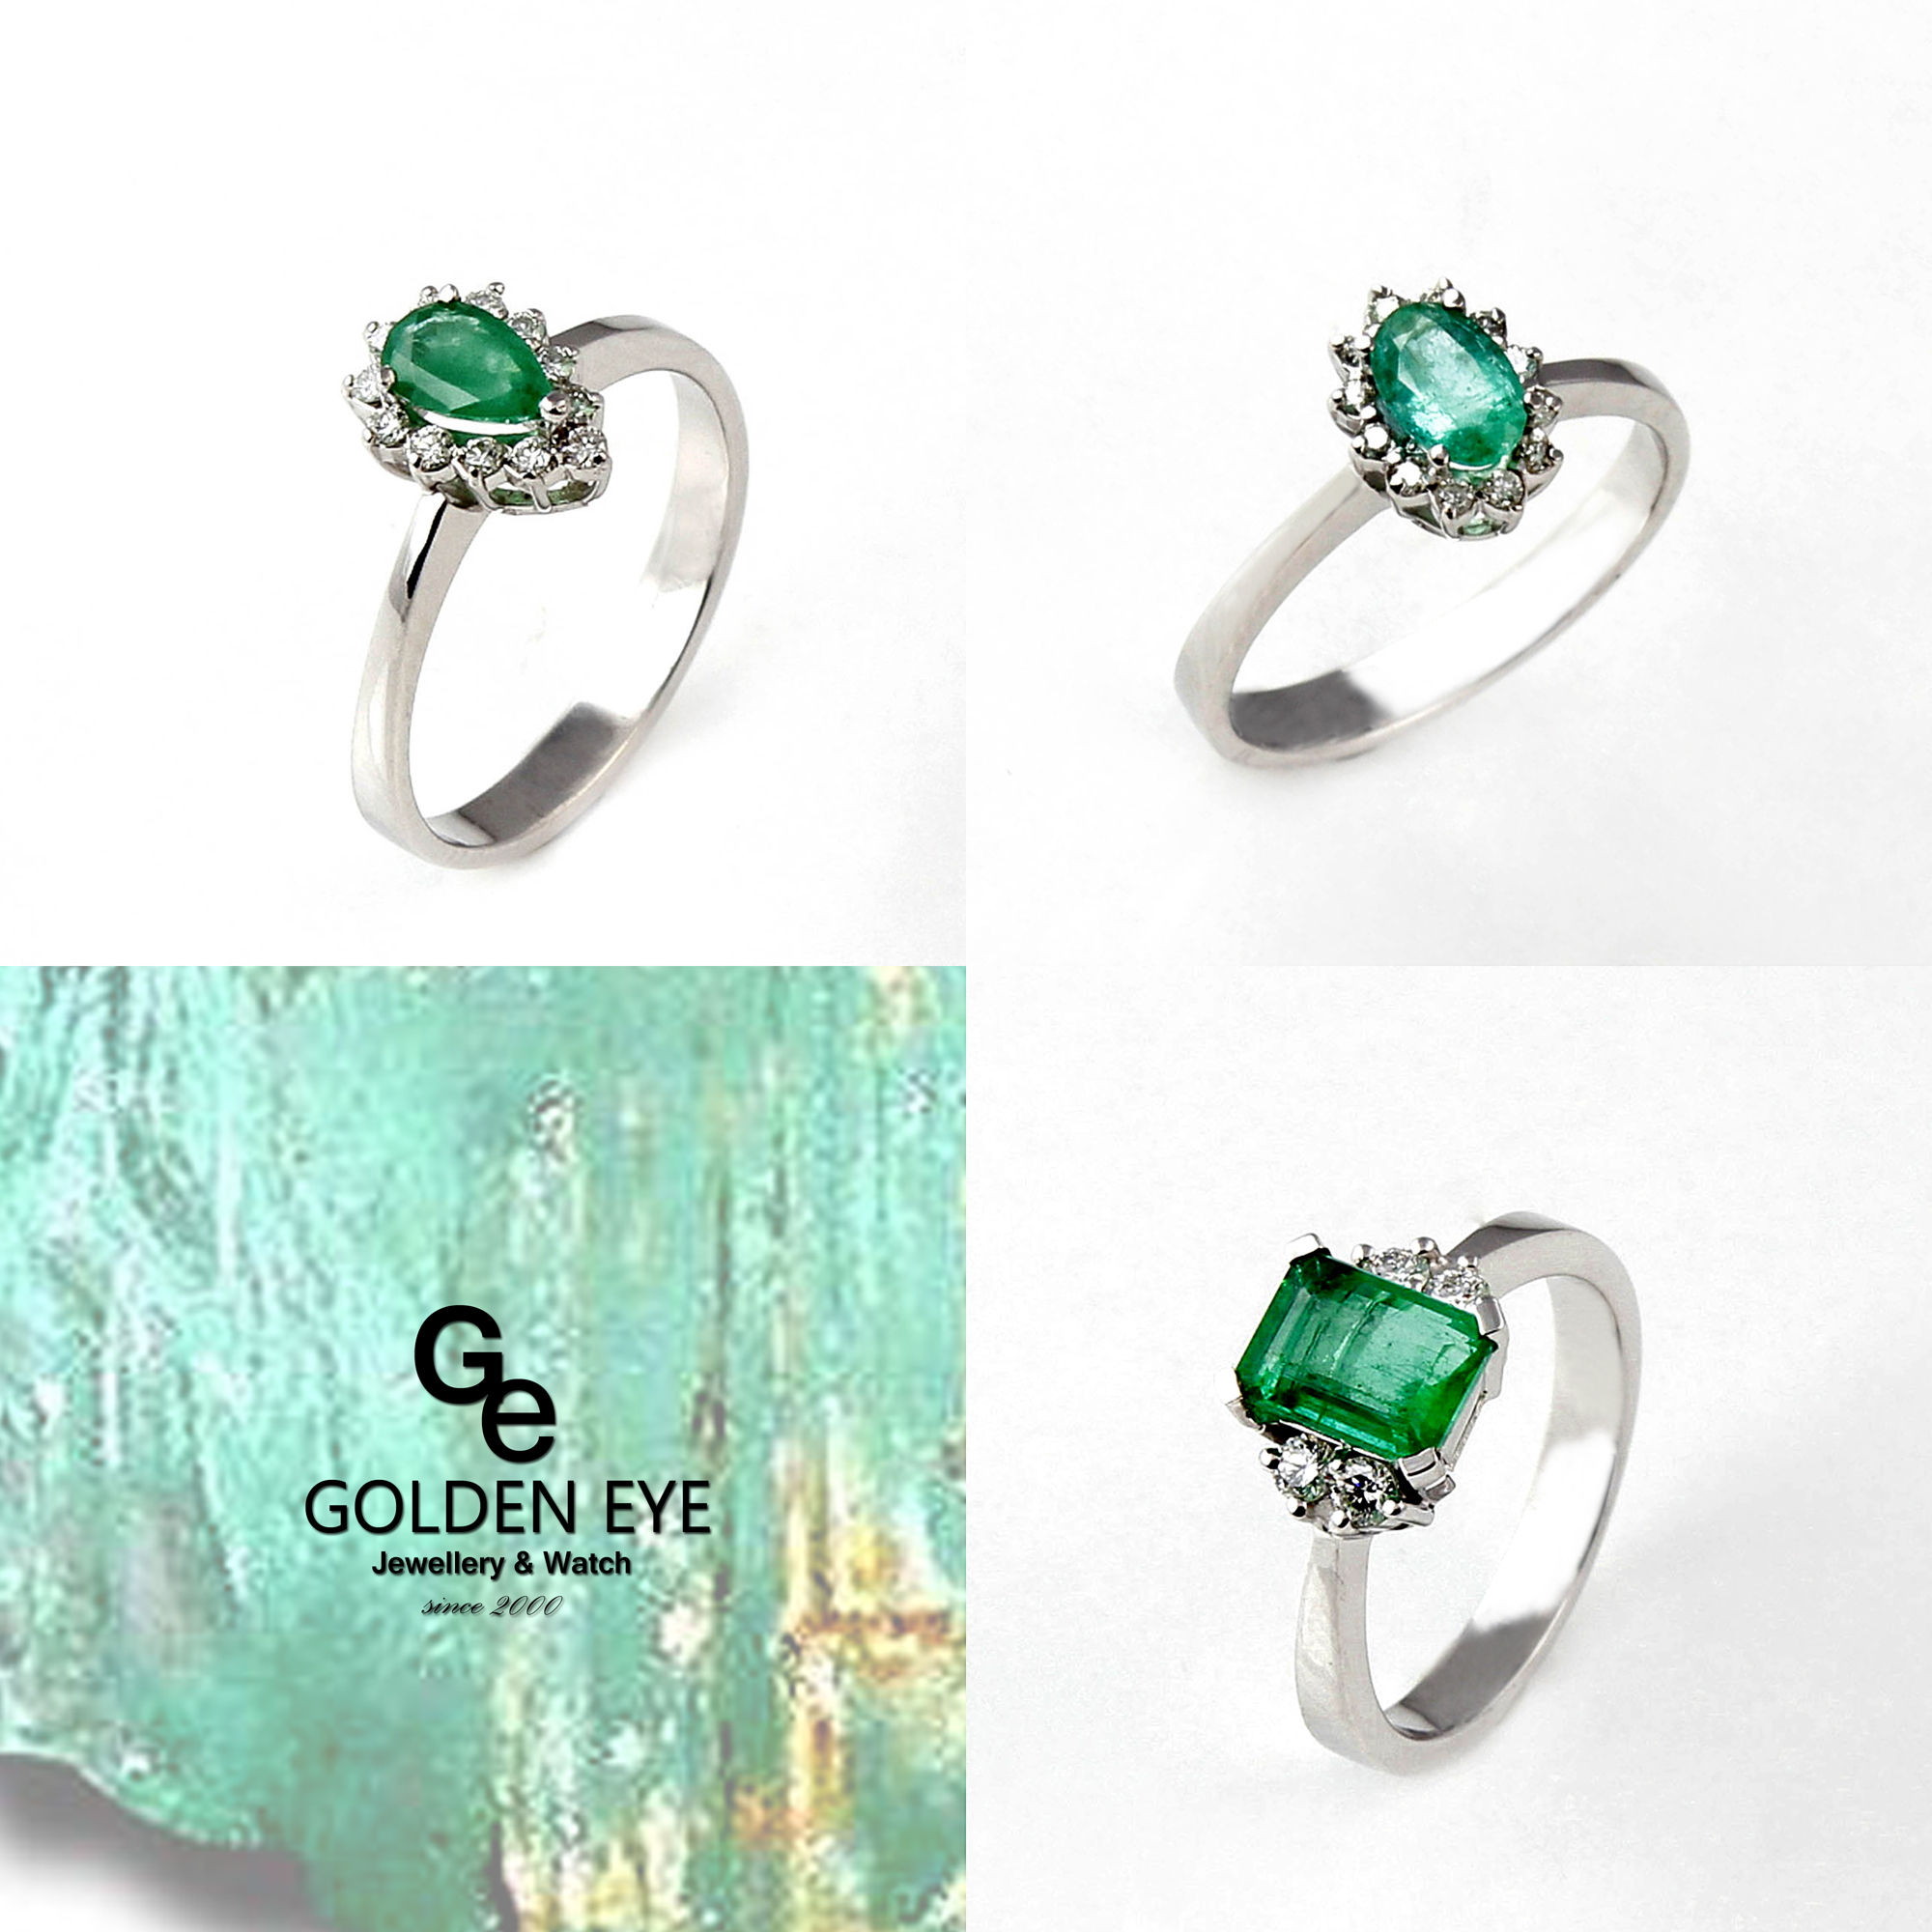 R035A White Gold Ring with Emerald and Diamonds